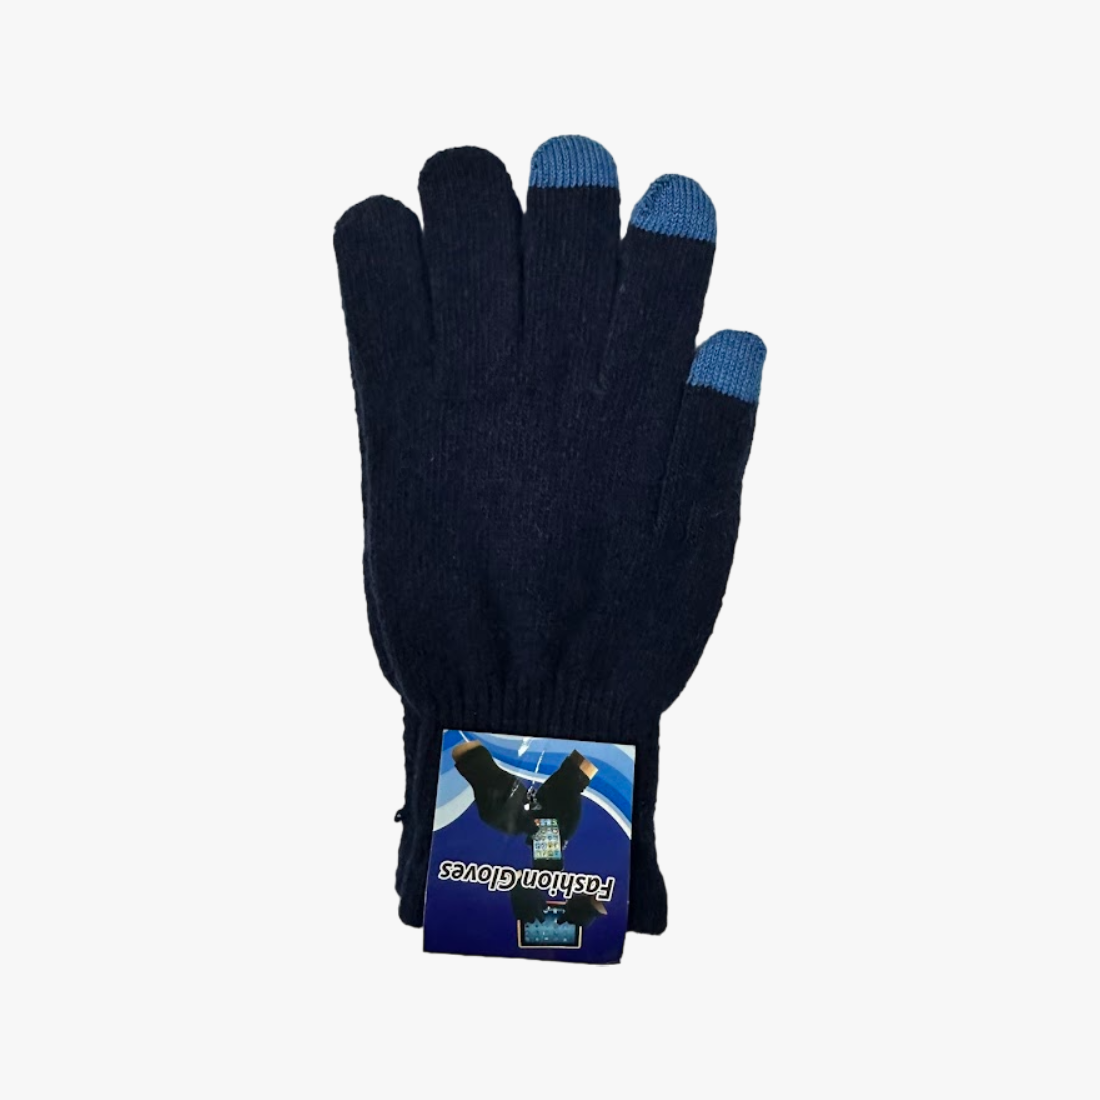 MEN WHOLESALE FASHION WINTER 3-FINGER TOUCH GLOVES ASSORTED - 6850